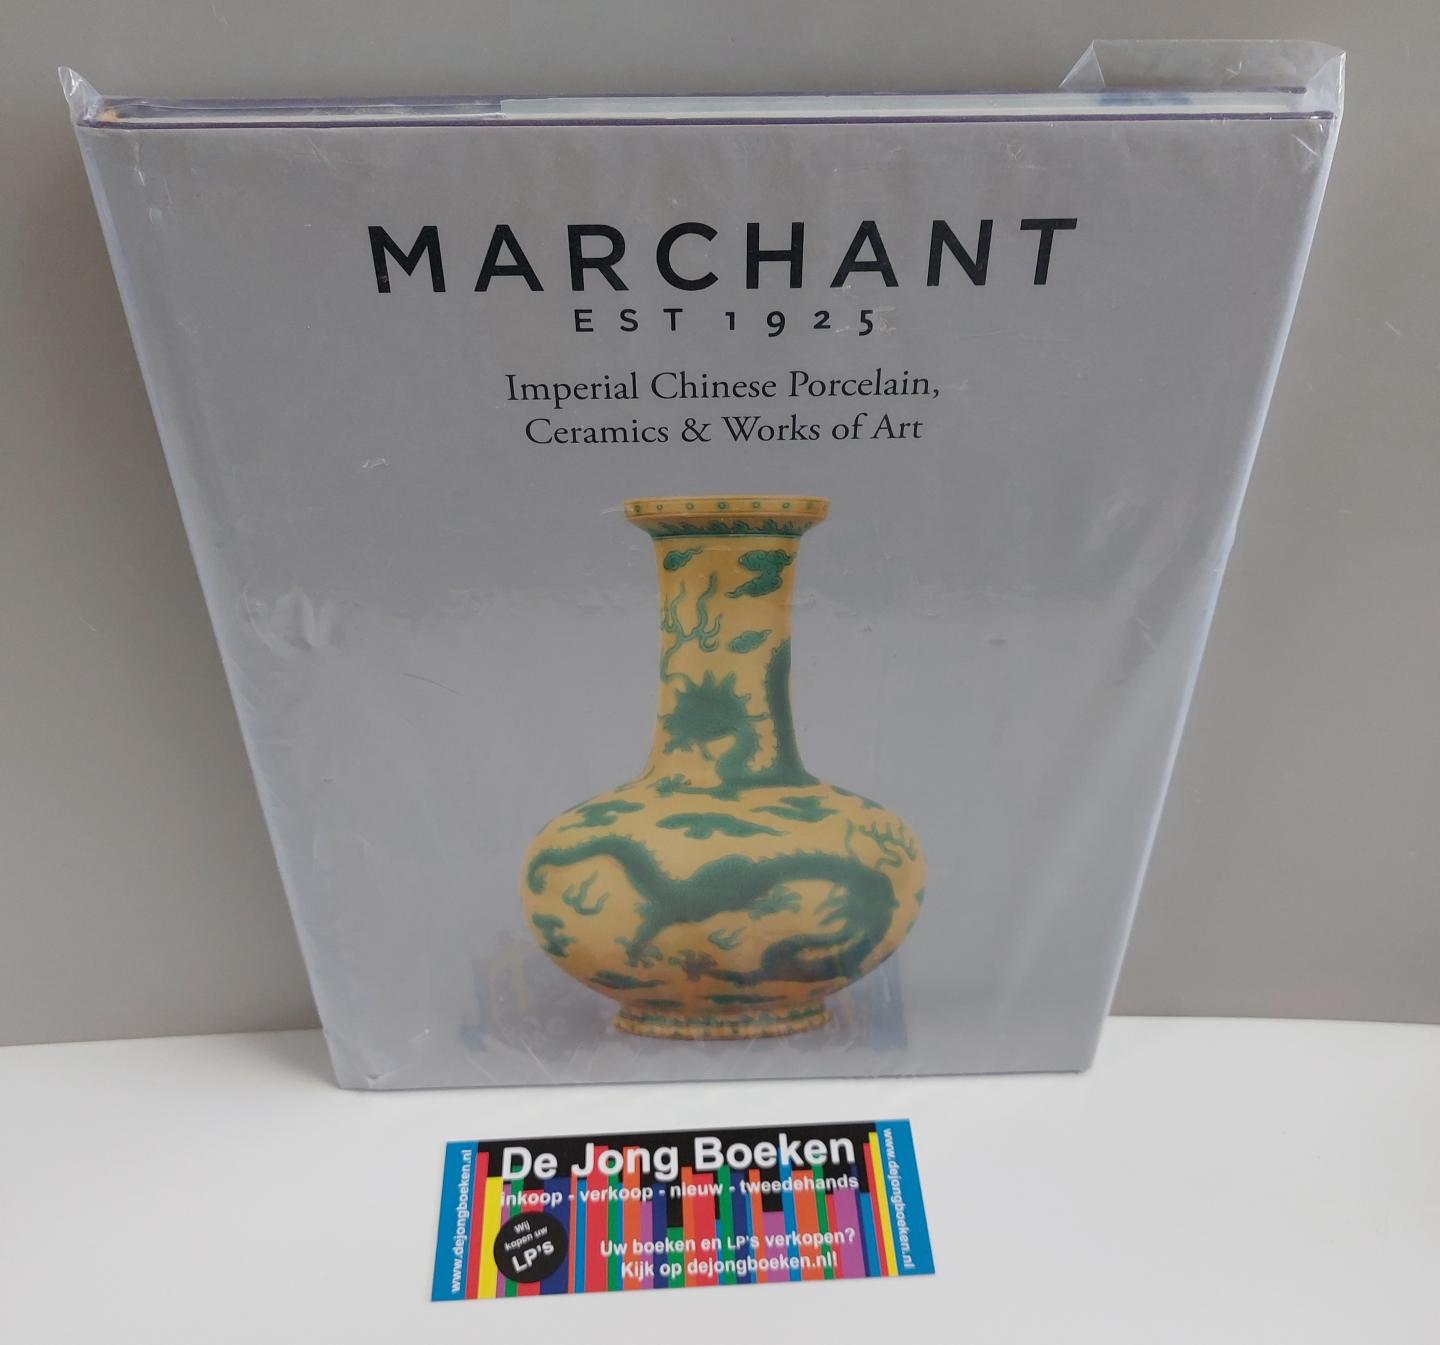 Marchant, Richard P. - Imperial Chinese Porcelain, Ceramics & Works of Art (Marchant Asian Art)